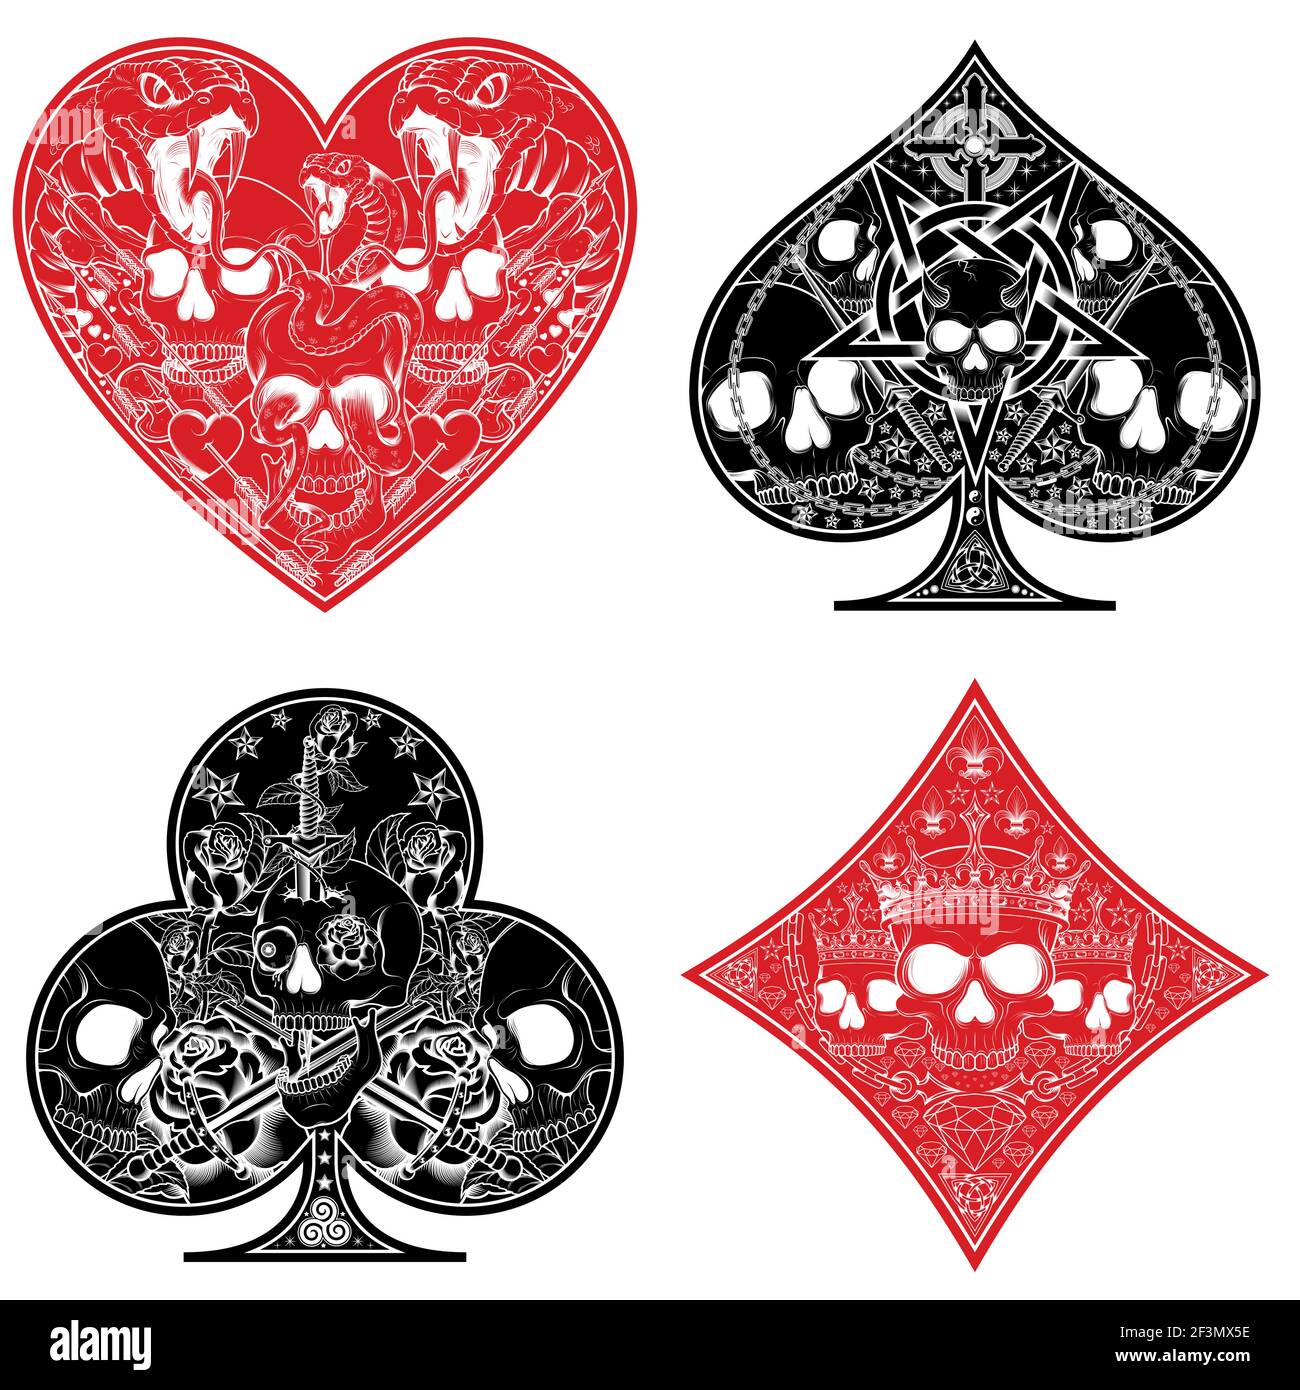 vector design of heart, diamond, clover and ace poker symbols with different line styles Stock Vector